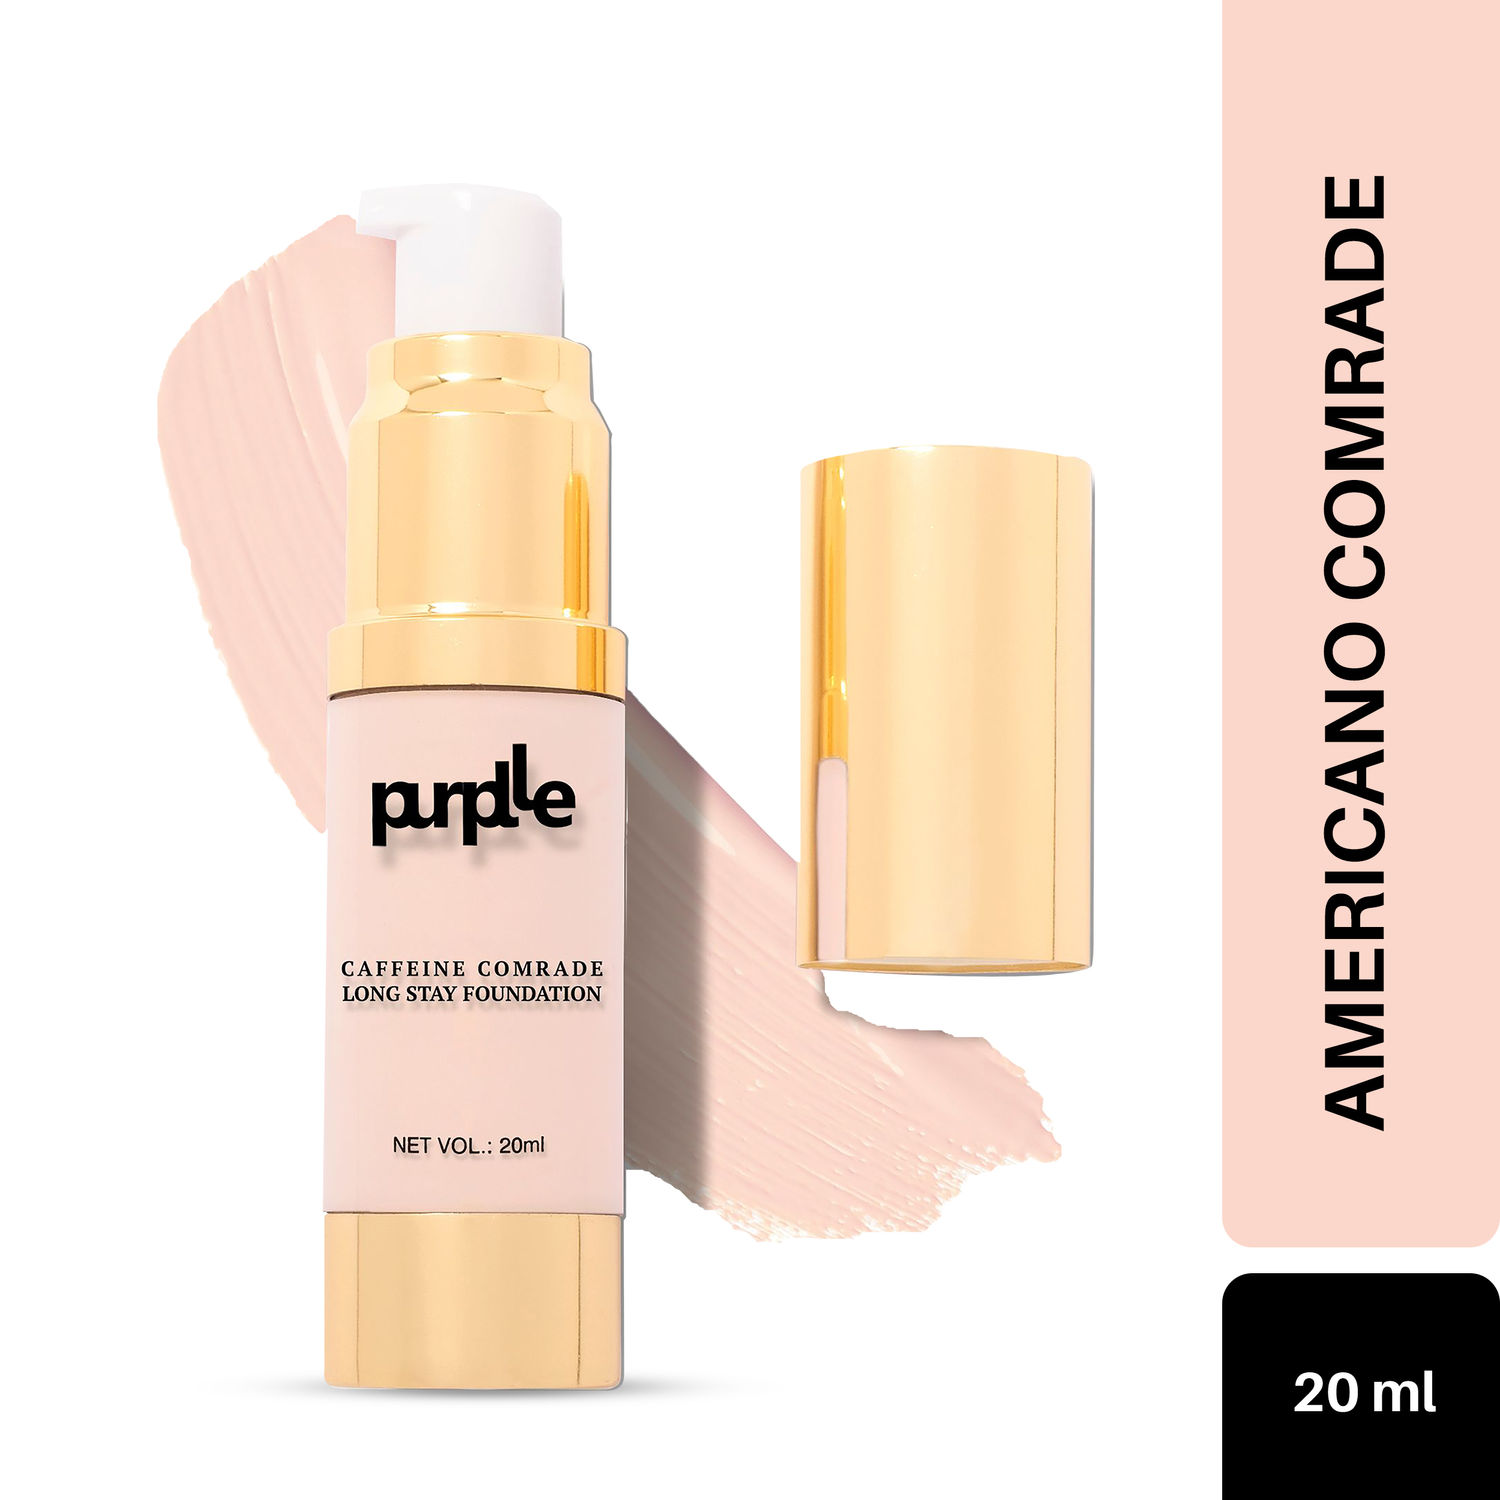 Buy Purplle Caffeine Comrade Long Stay Foundation For Dark Skin|Matte|Sweatproof|Weightless|Paraben and Sulphate Free - Americano Comrade 7 (20 ml) - Purplle